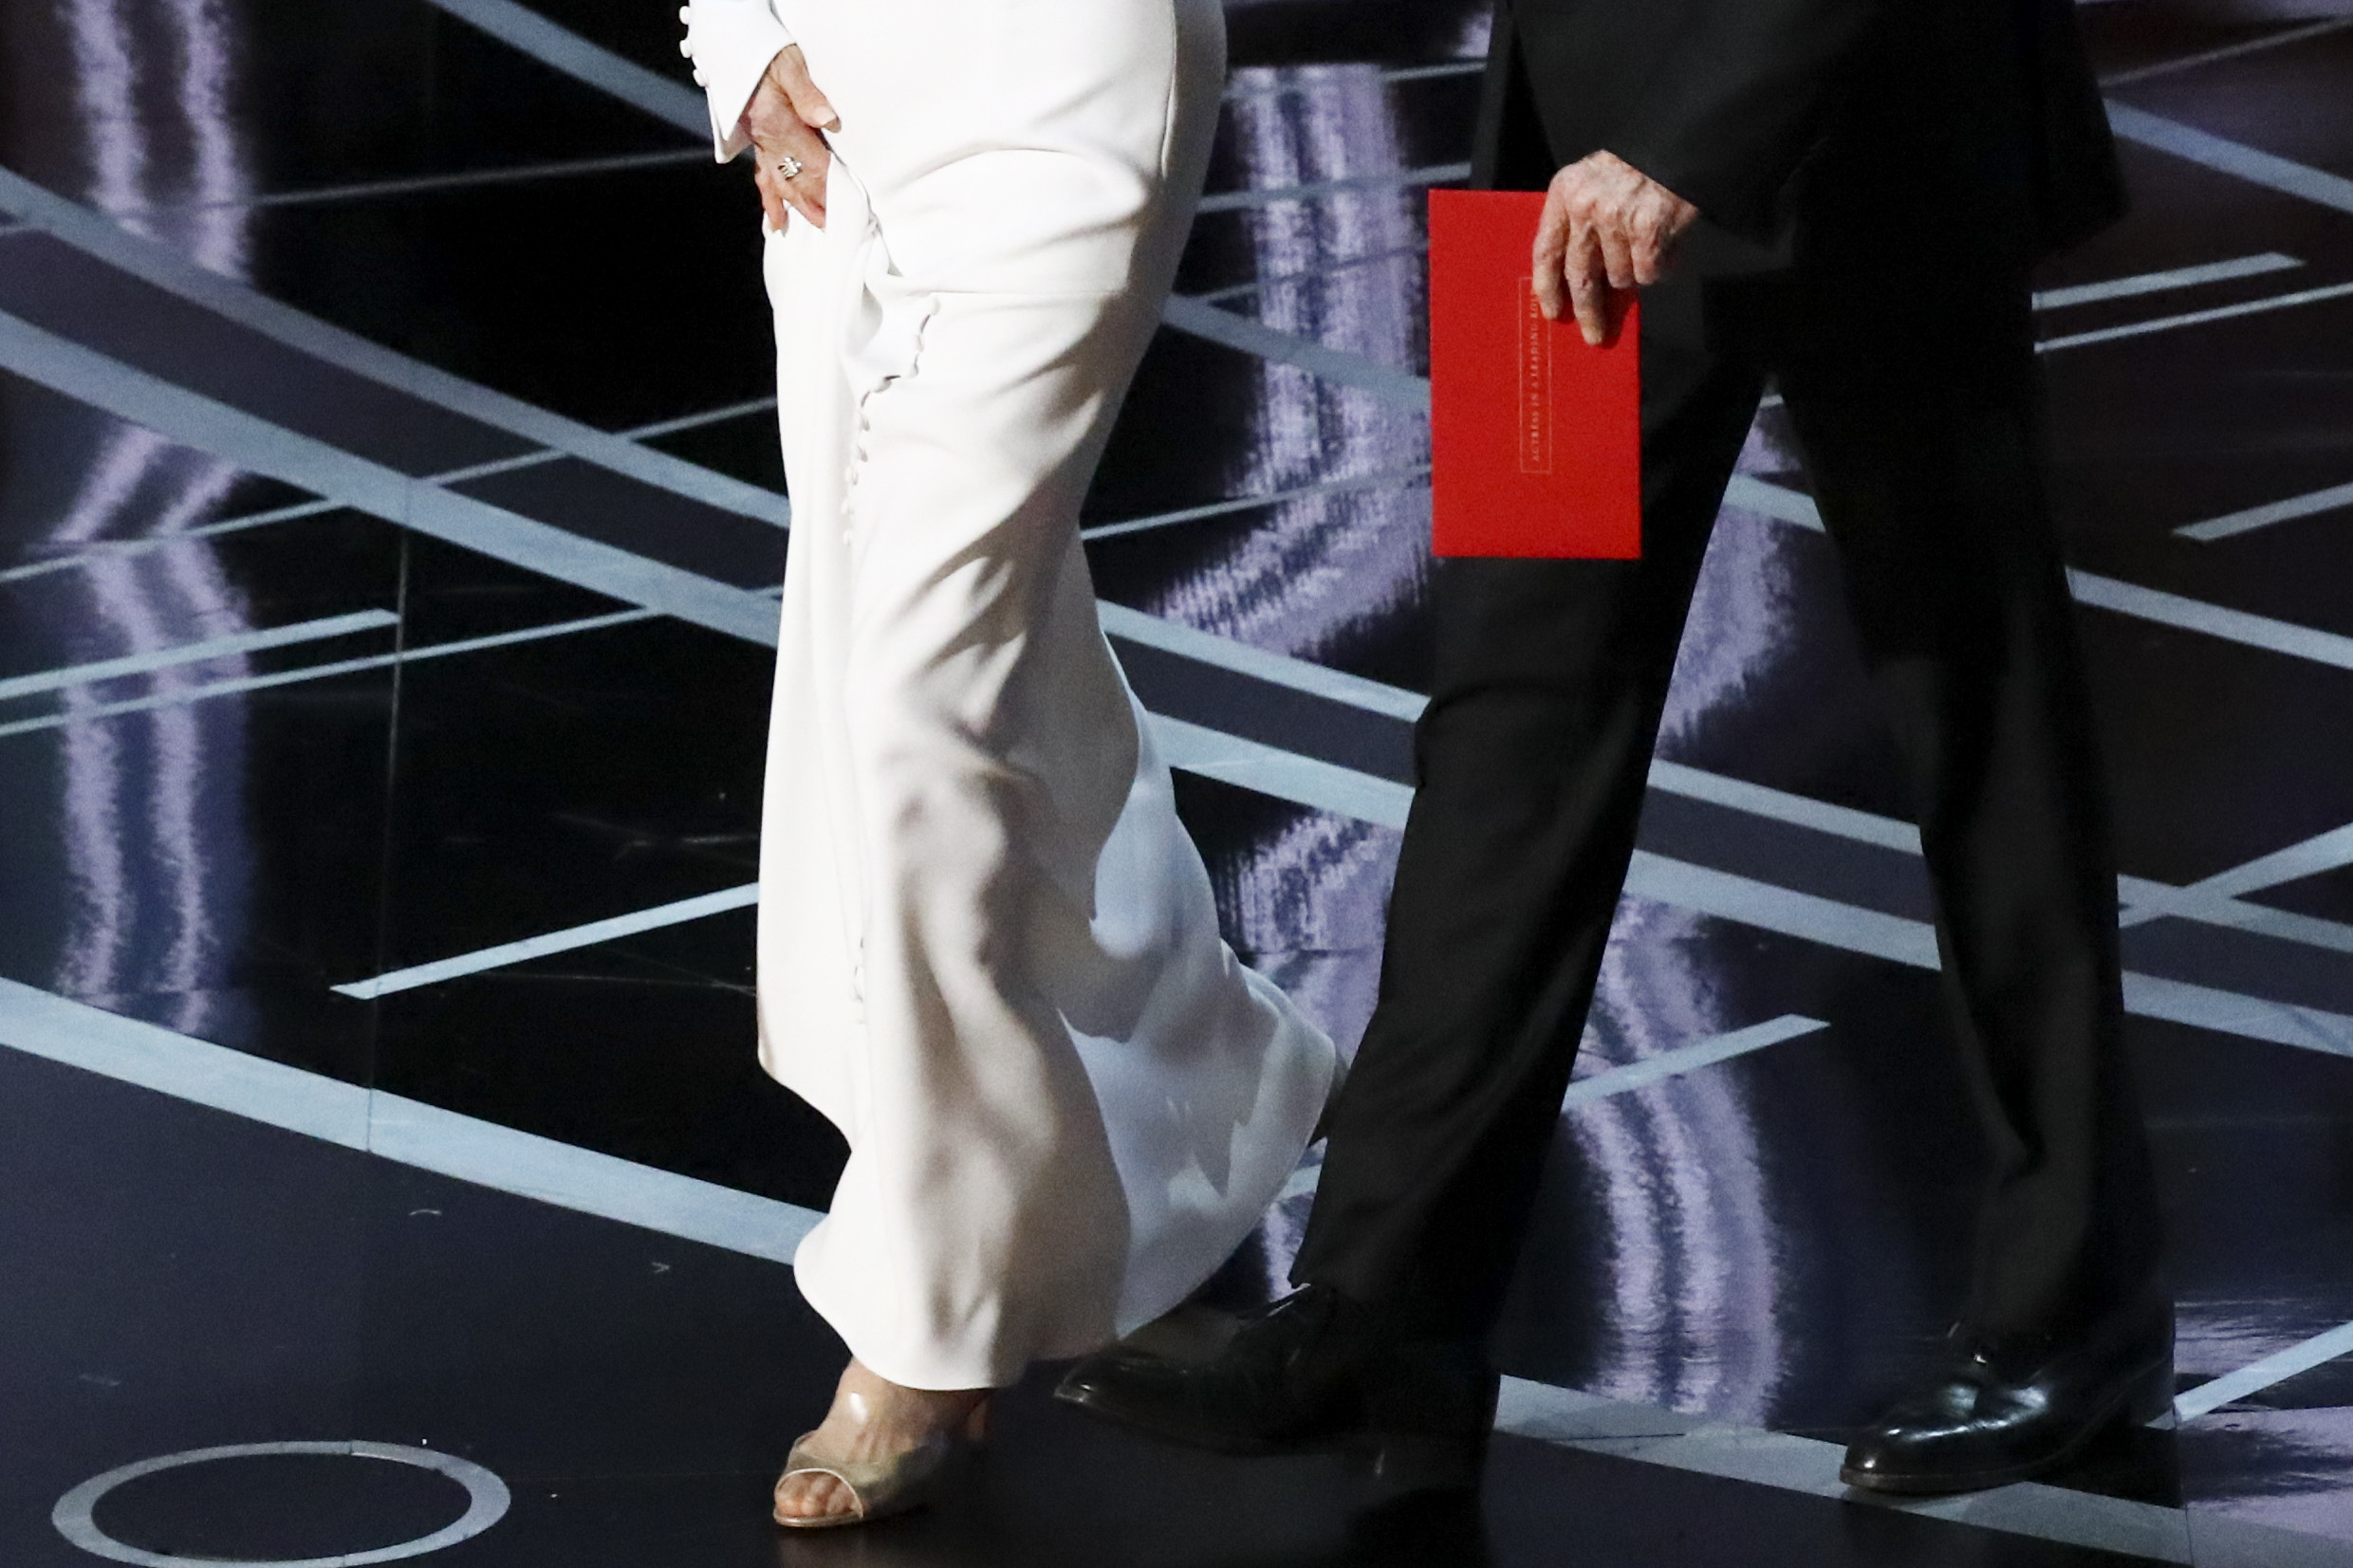 PHOTO: Warren Beatty carries an envelope reading "Actress in a Leading Role" as he walks on stage with Faye Dunaway to present the Oscar for Best Picture during the 89th Academy Awards in Los Angeles, Feb. 26, 2017.